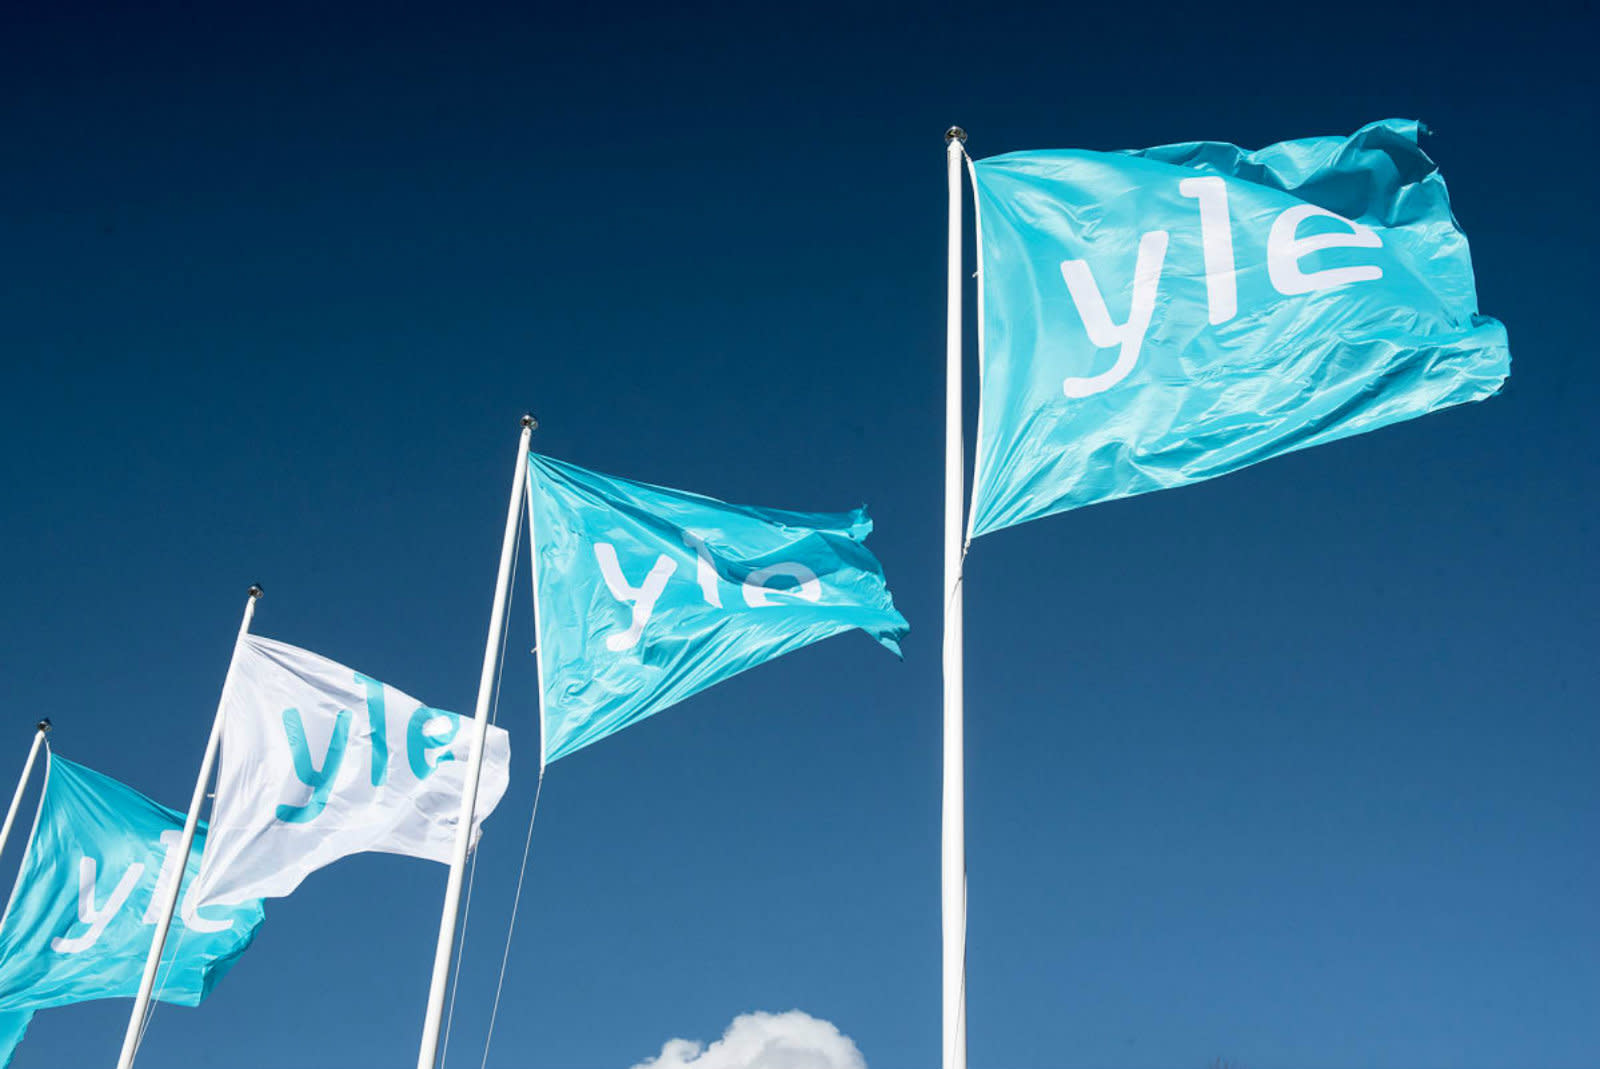 Yle’s research: Journalists are under more pressure on social media